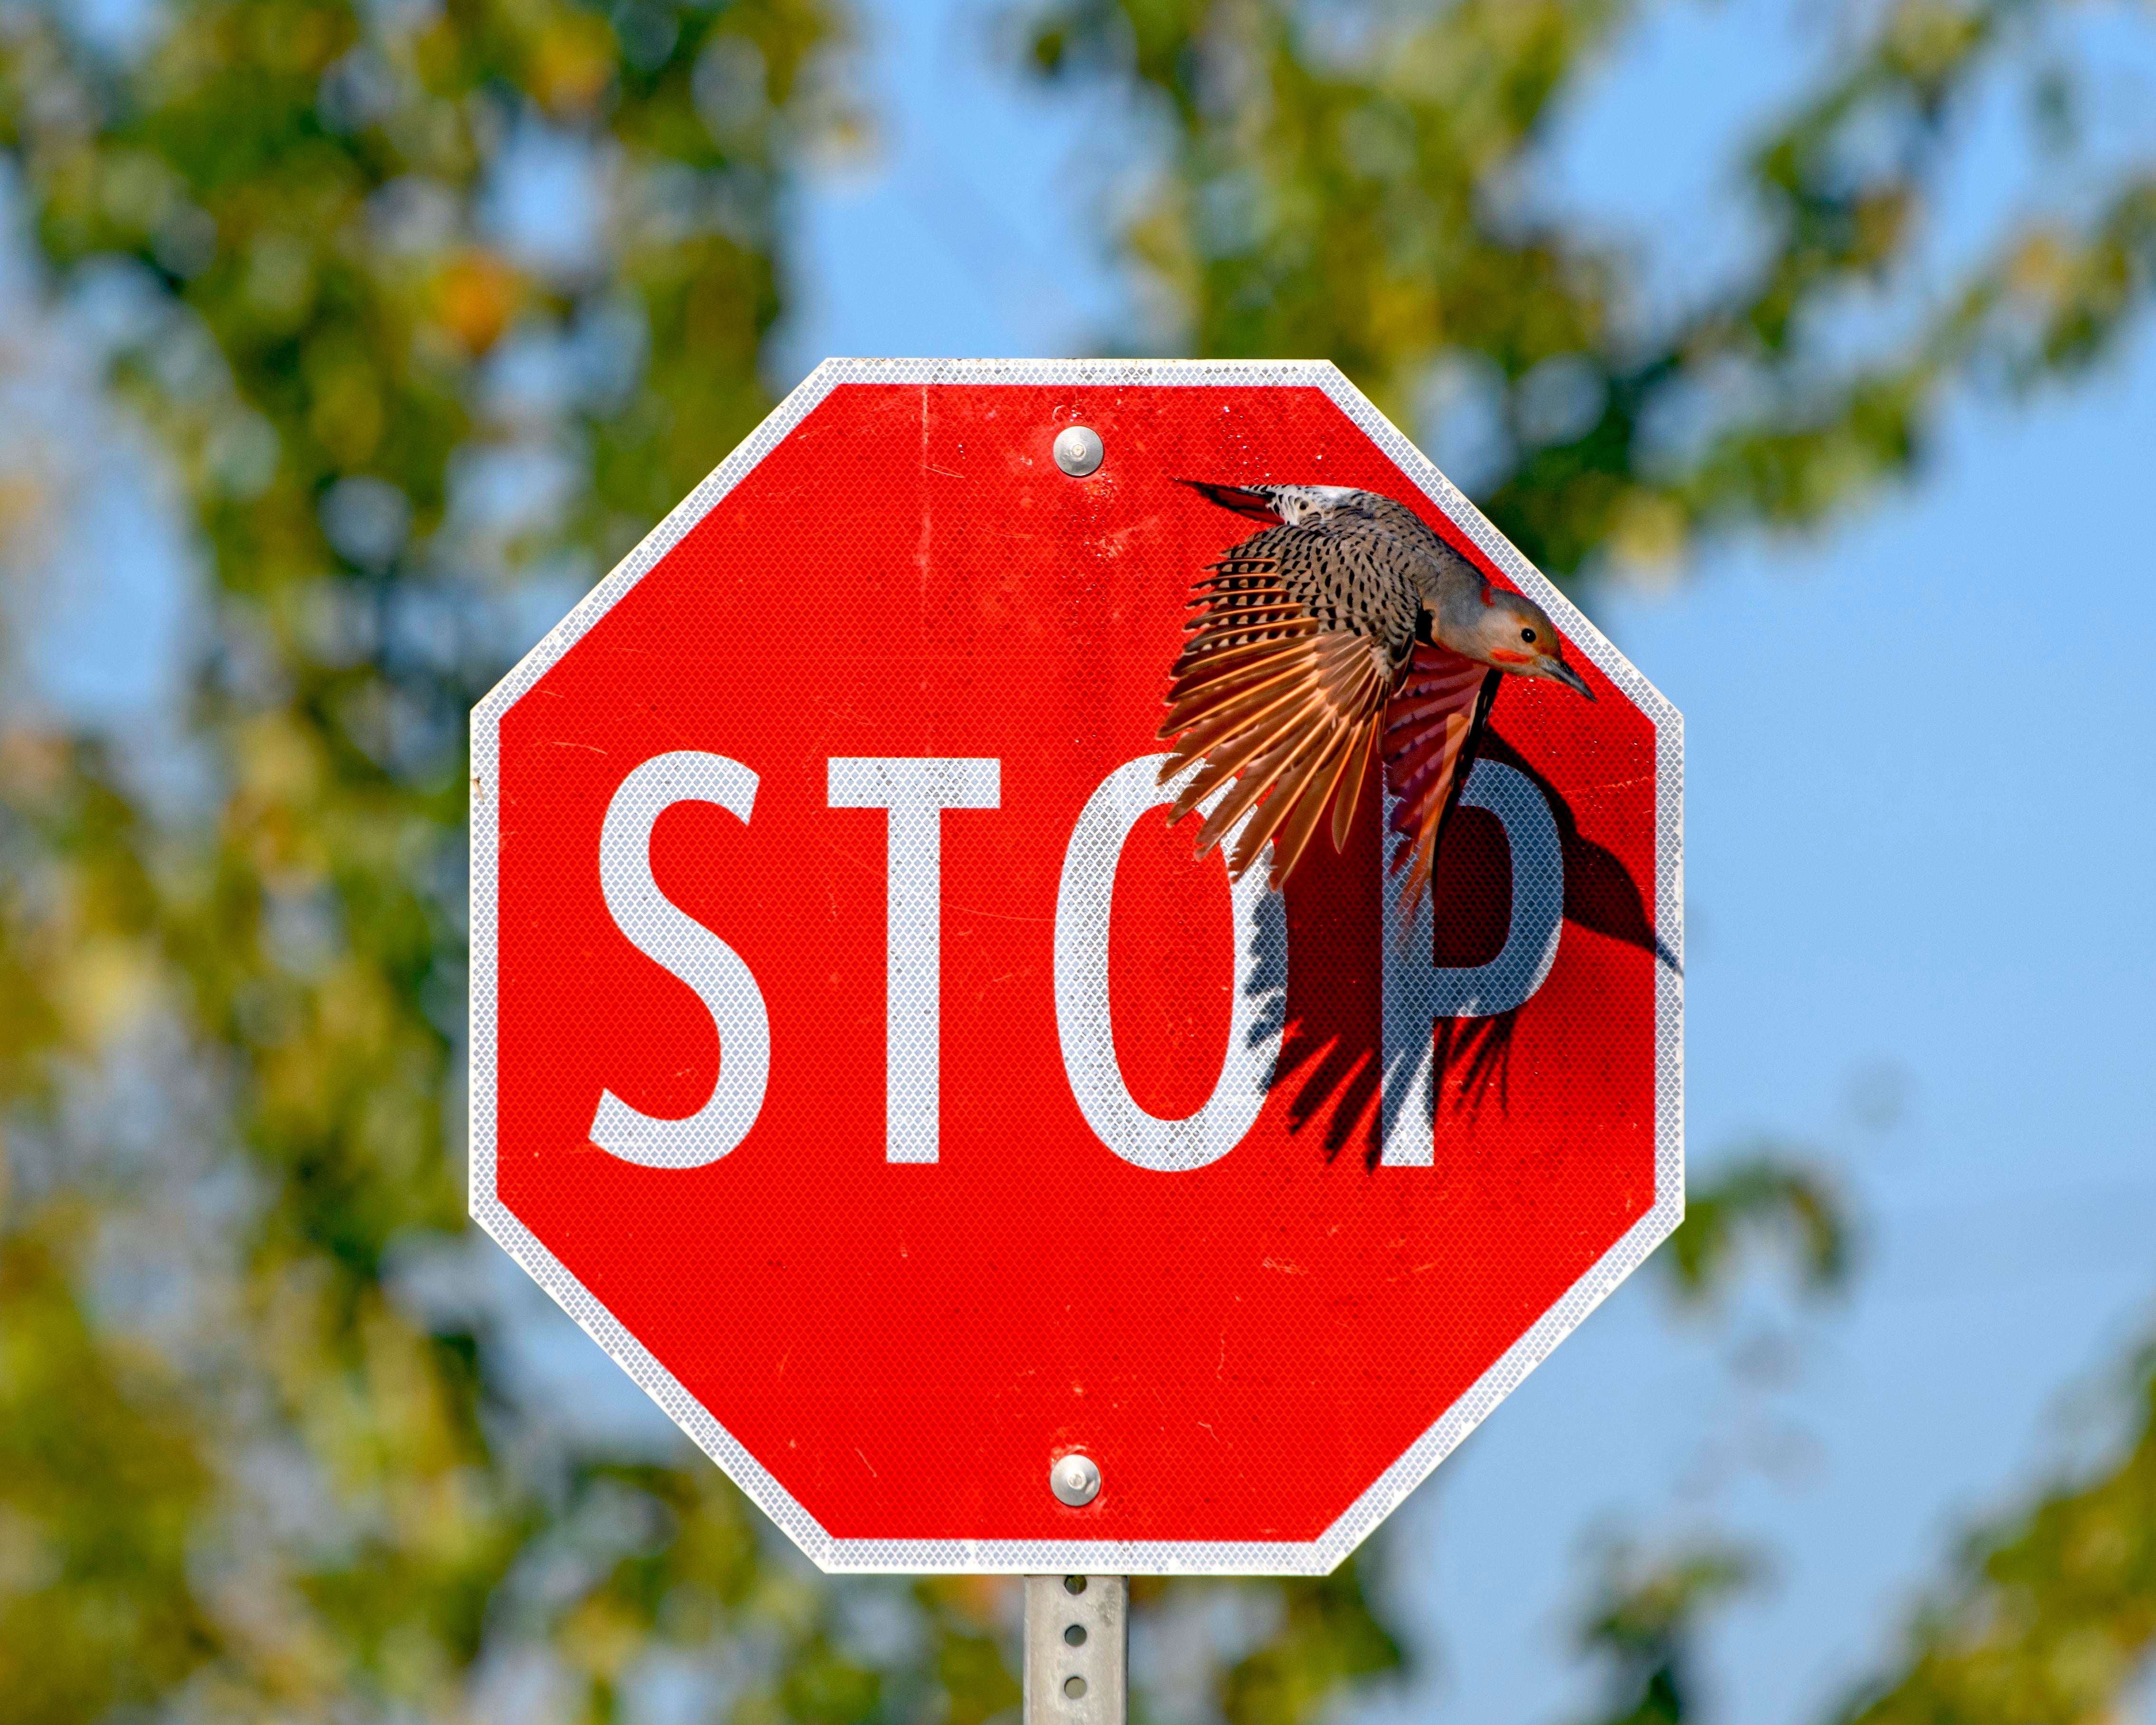 image showing ITAP of STOP